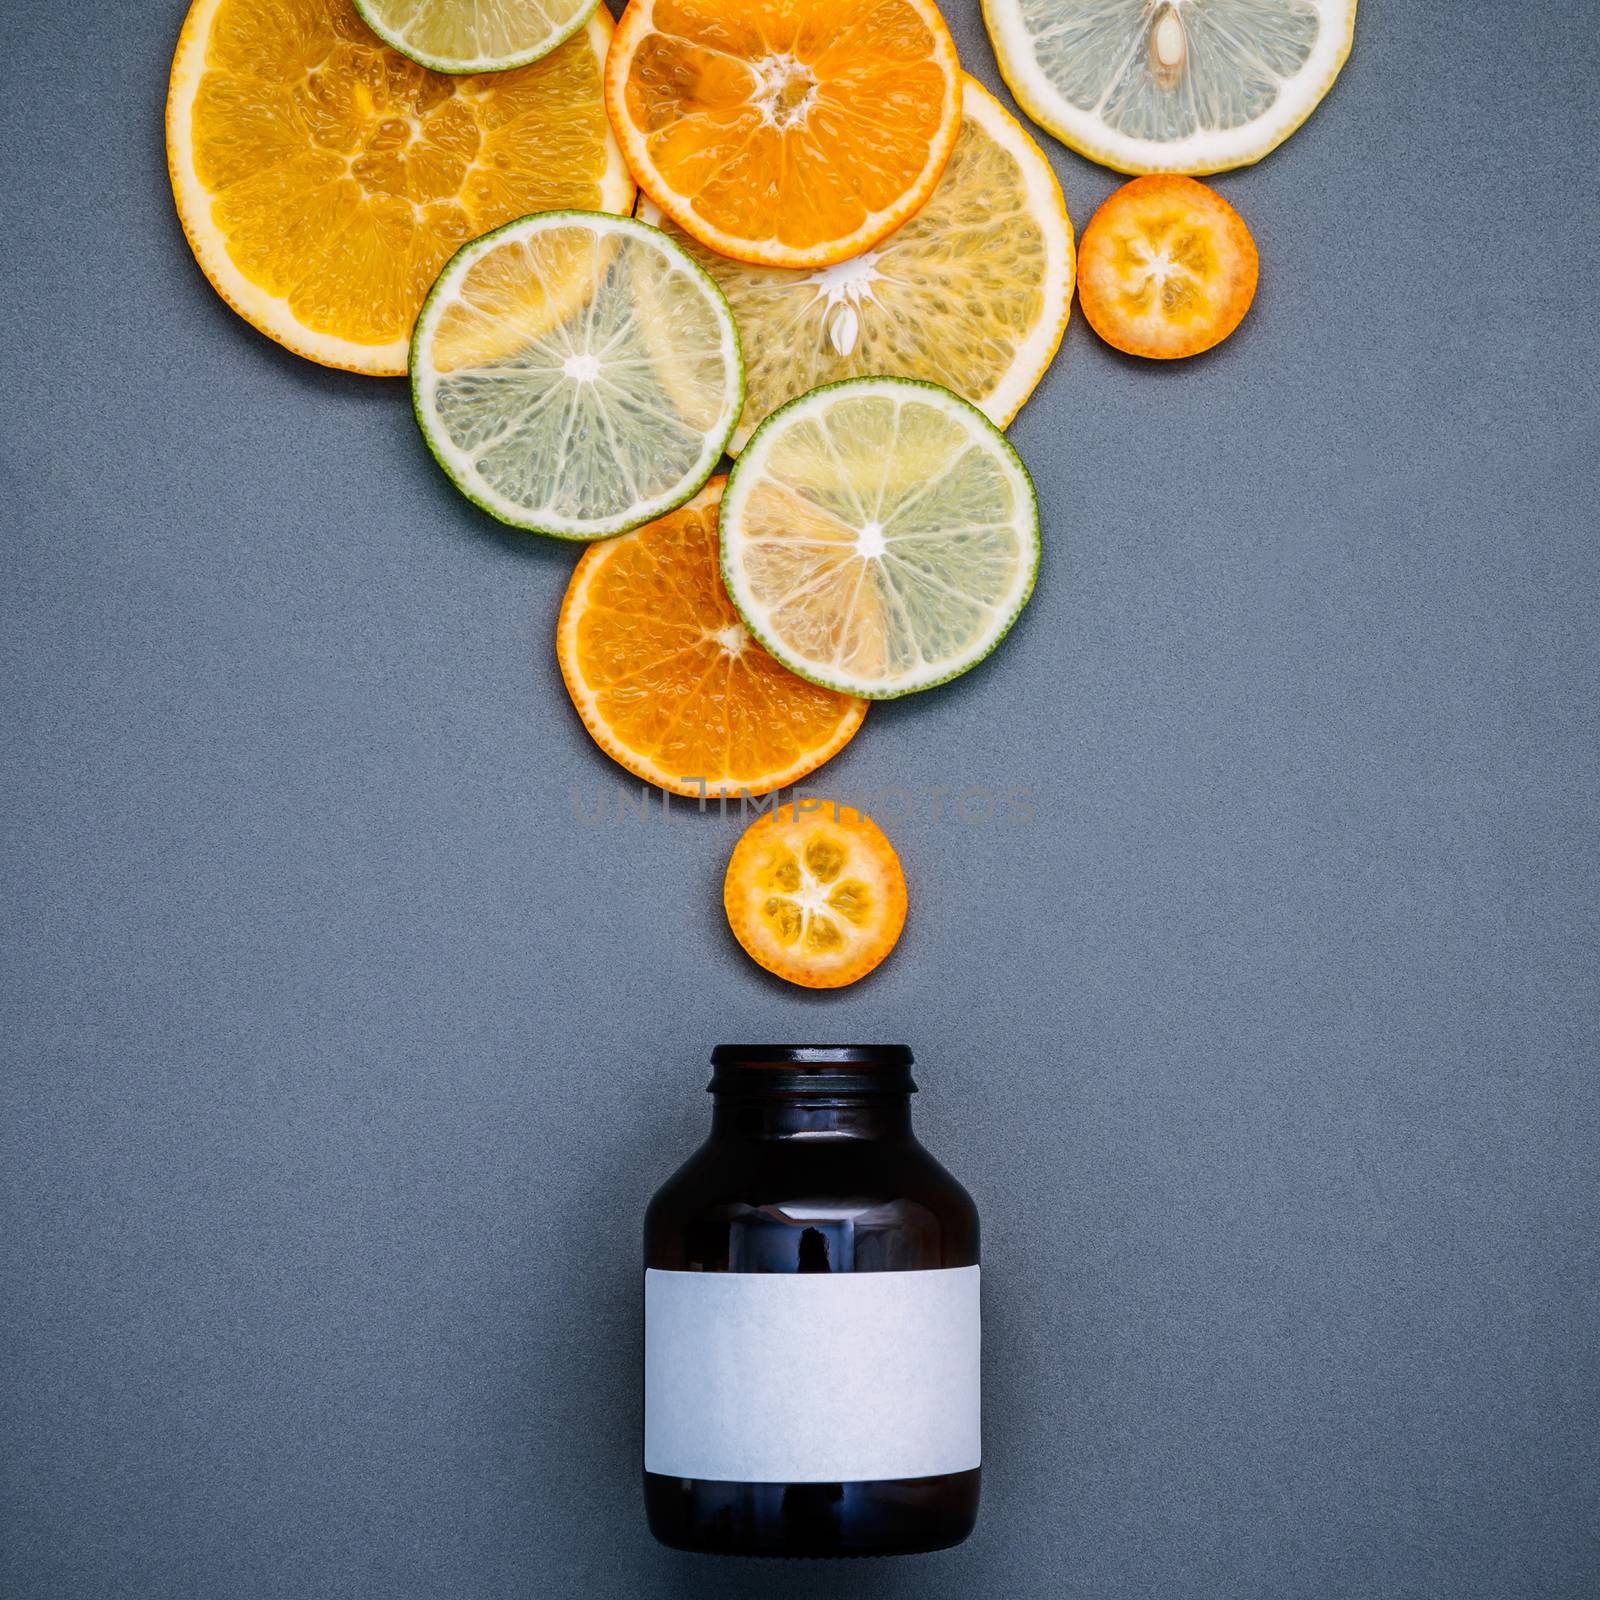 Healthy foods and medicine concept. Bottle of vitamin C and vari by kerdkanno